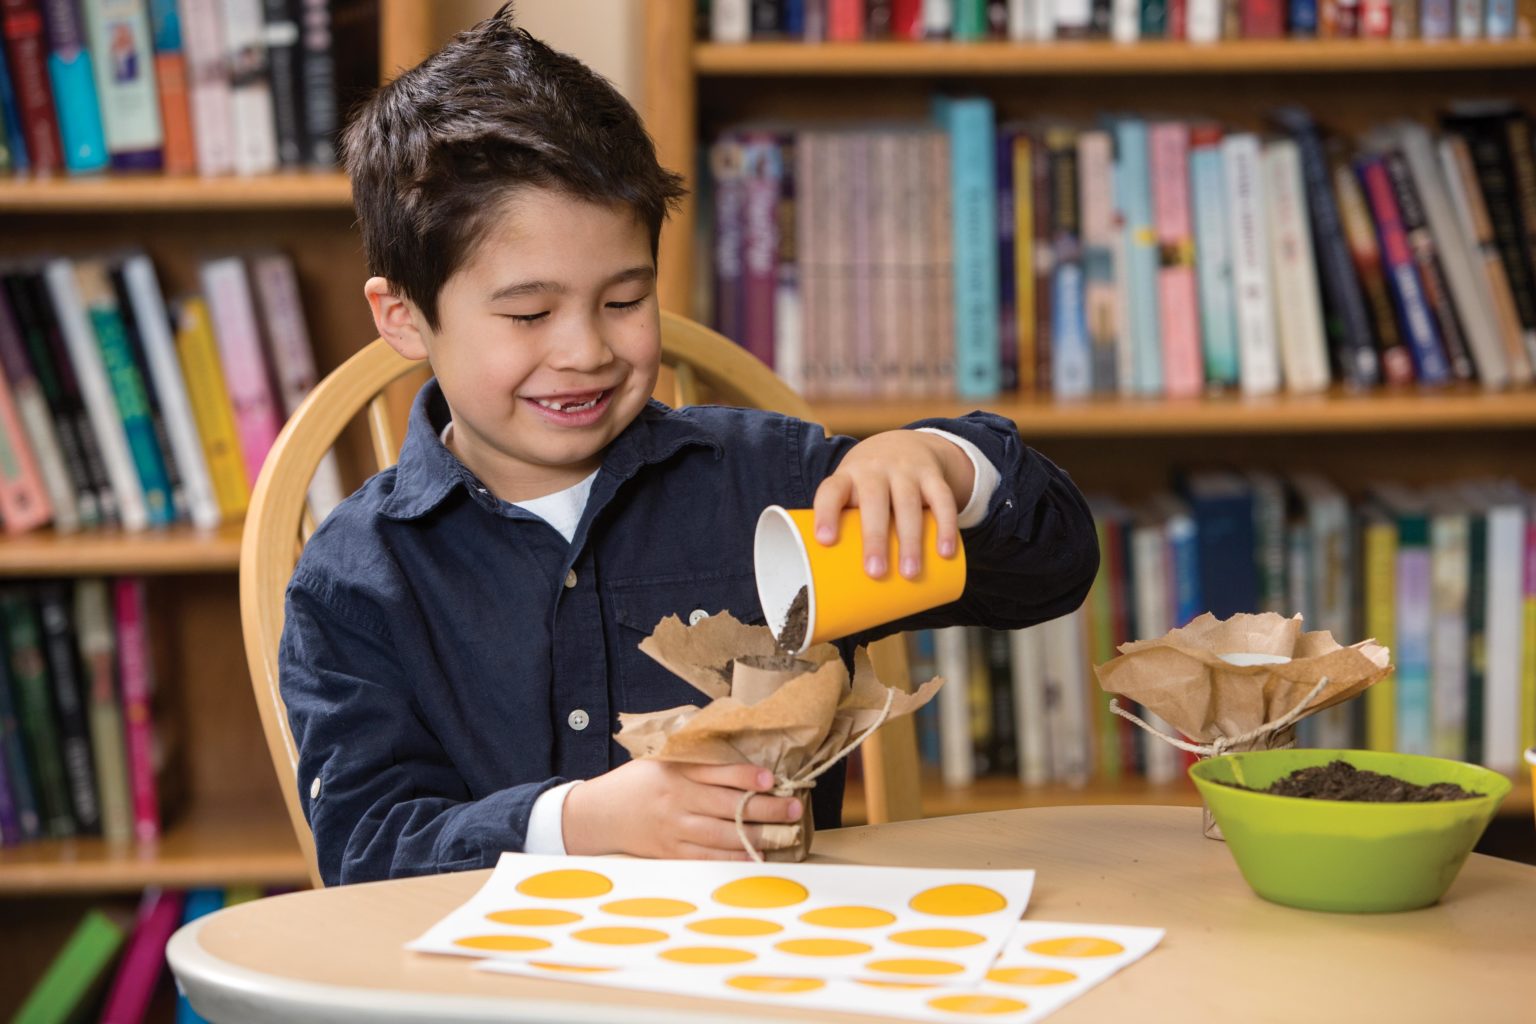 Elementary boy sitting at a table as he pours potting soil into a paper towel roll.